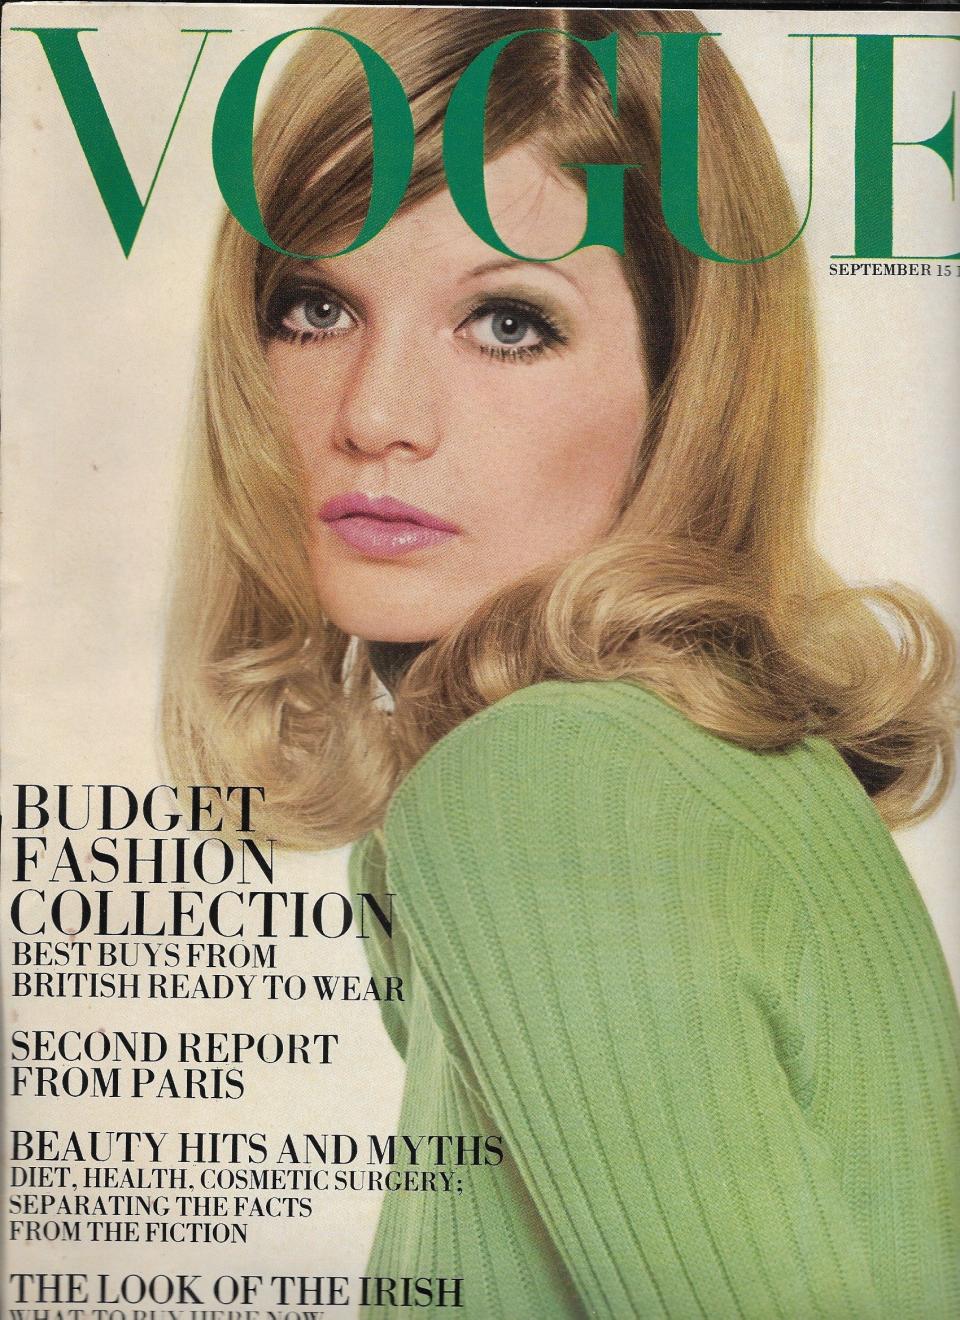 A Vogue cover from 1967